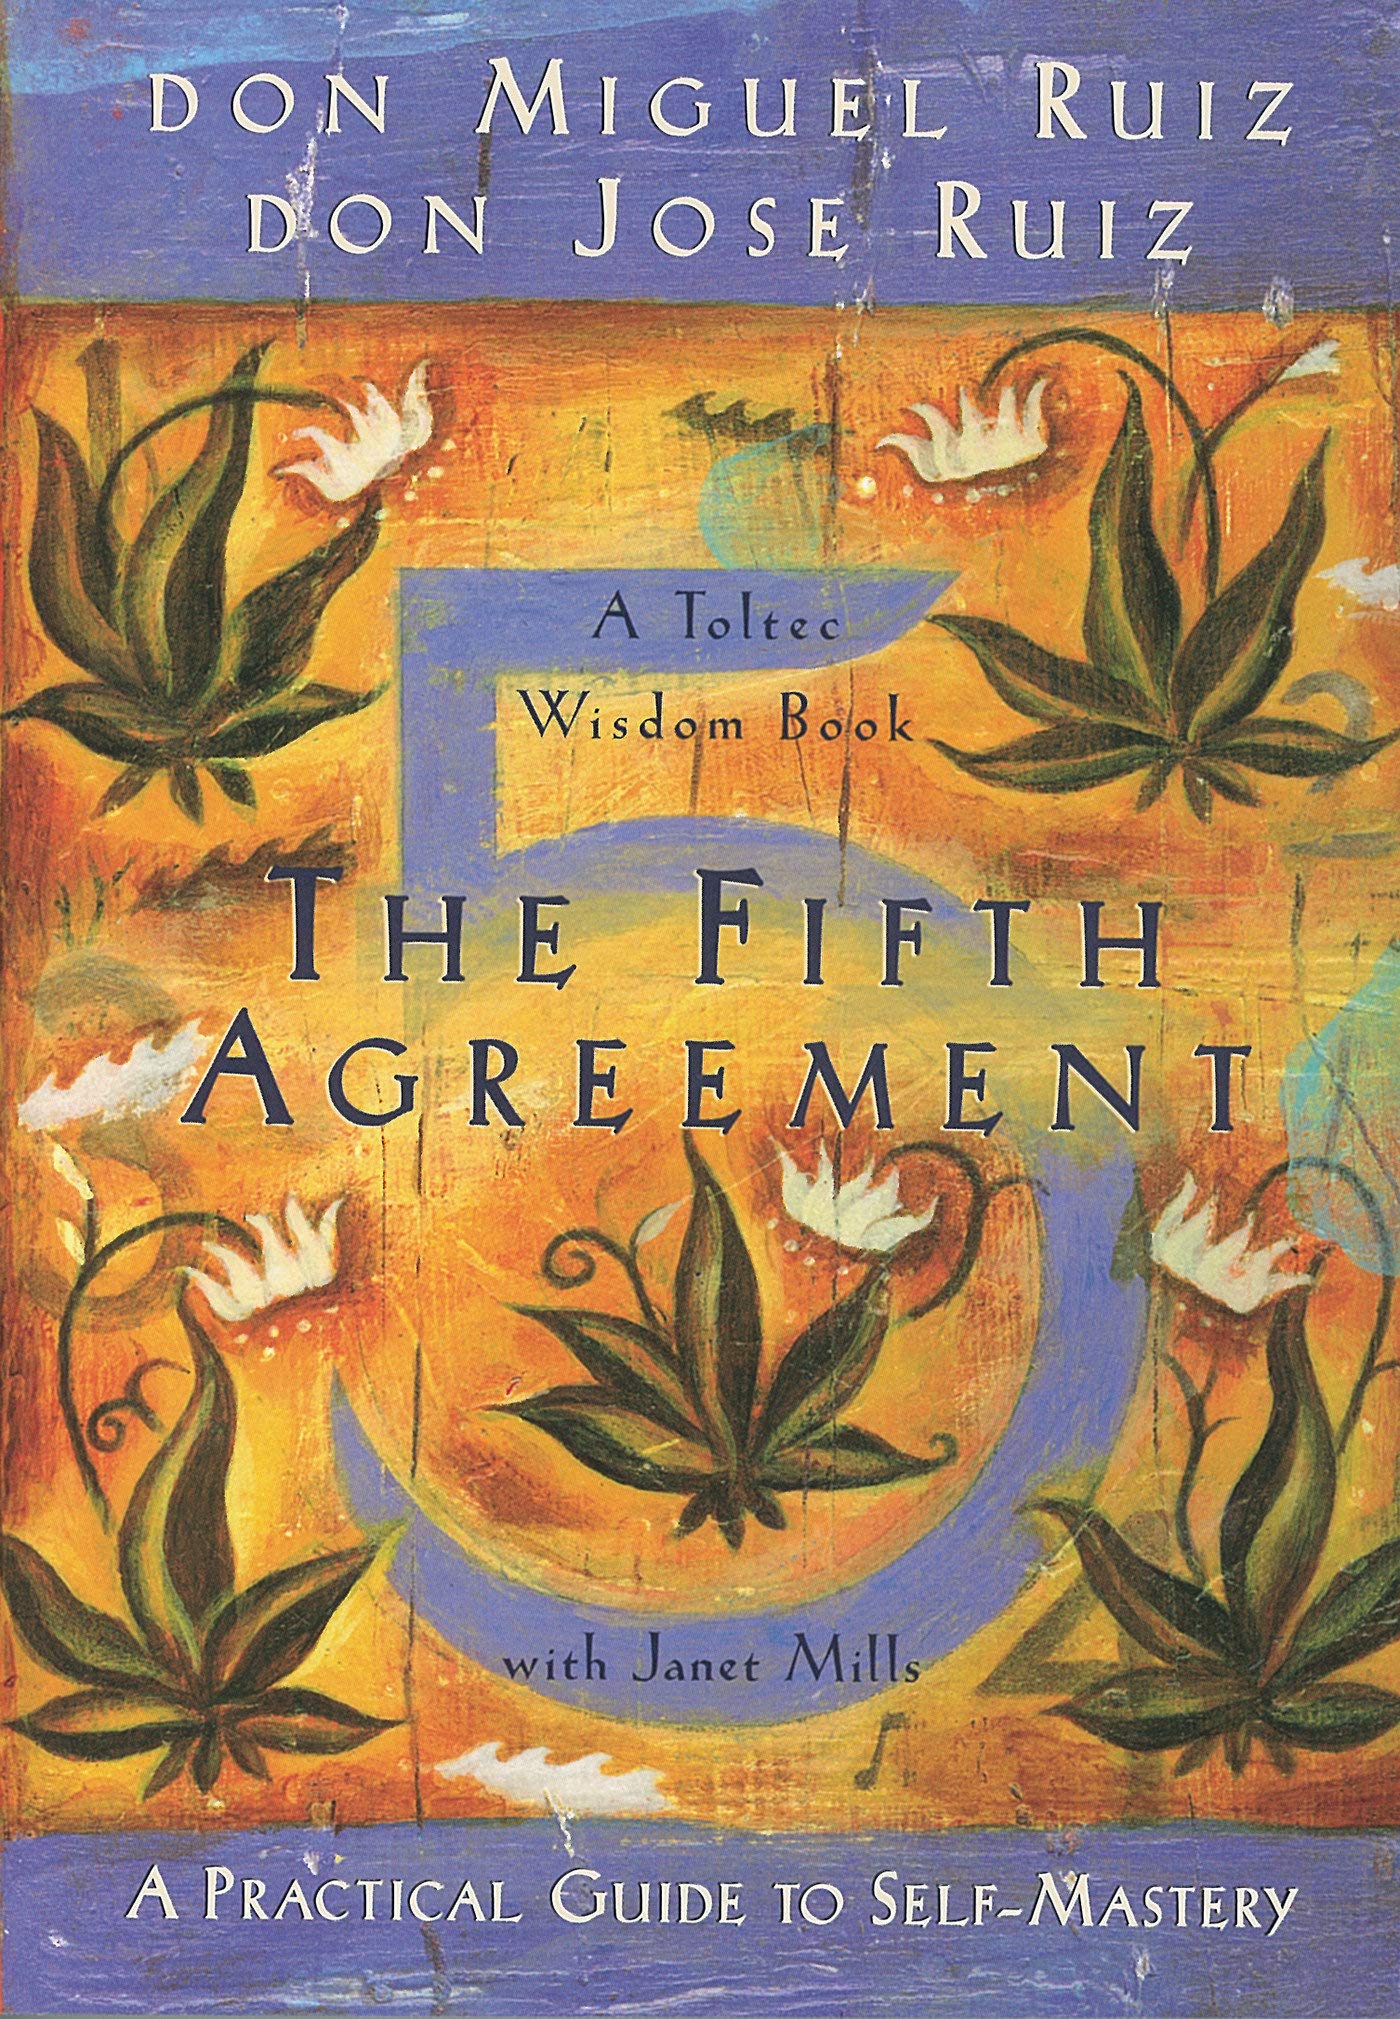 The Fifth Agreement: A Practical Guide to Self-Mastery (Copy) (Copy)